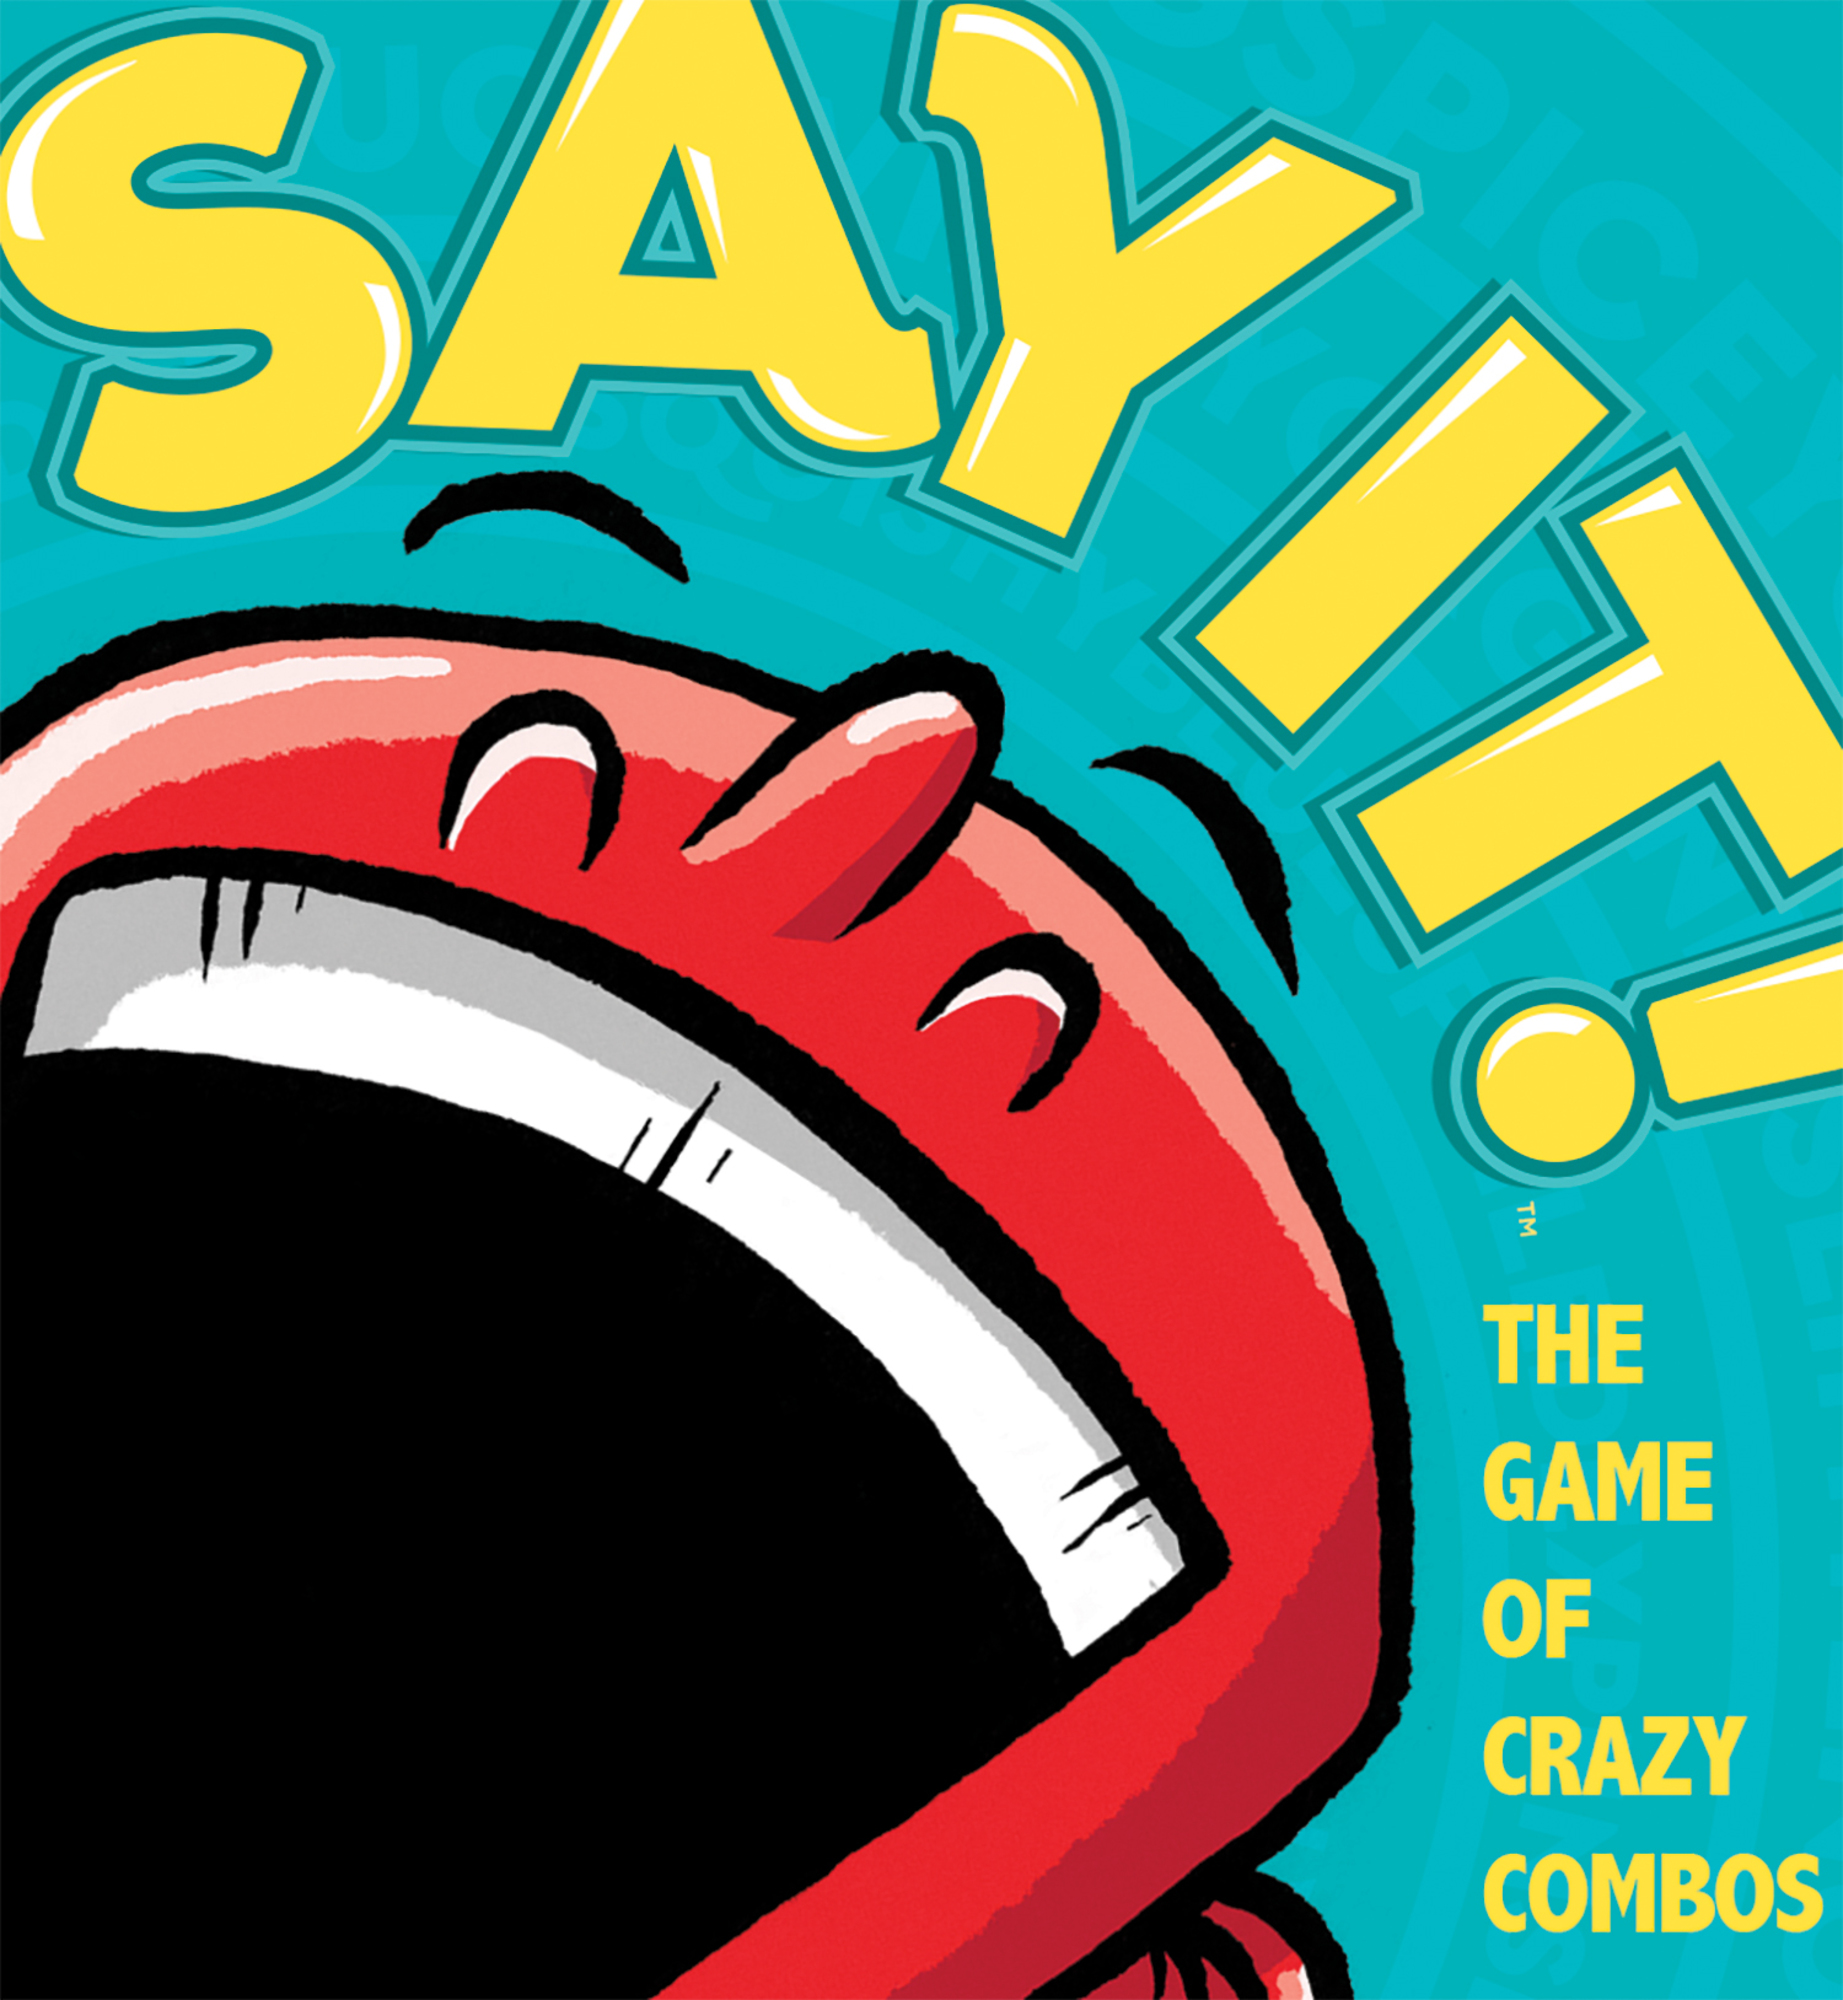 Say It! | The Game of Crazy Combos | Gamewright